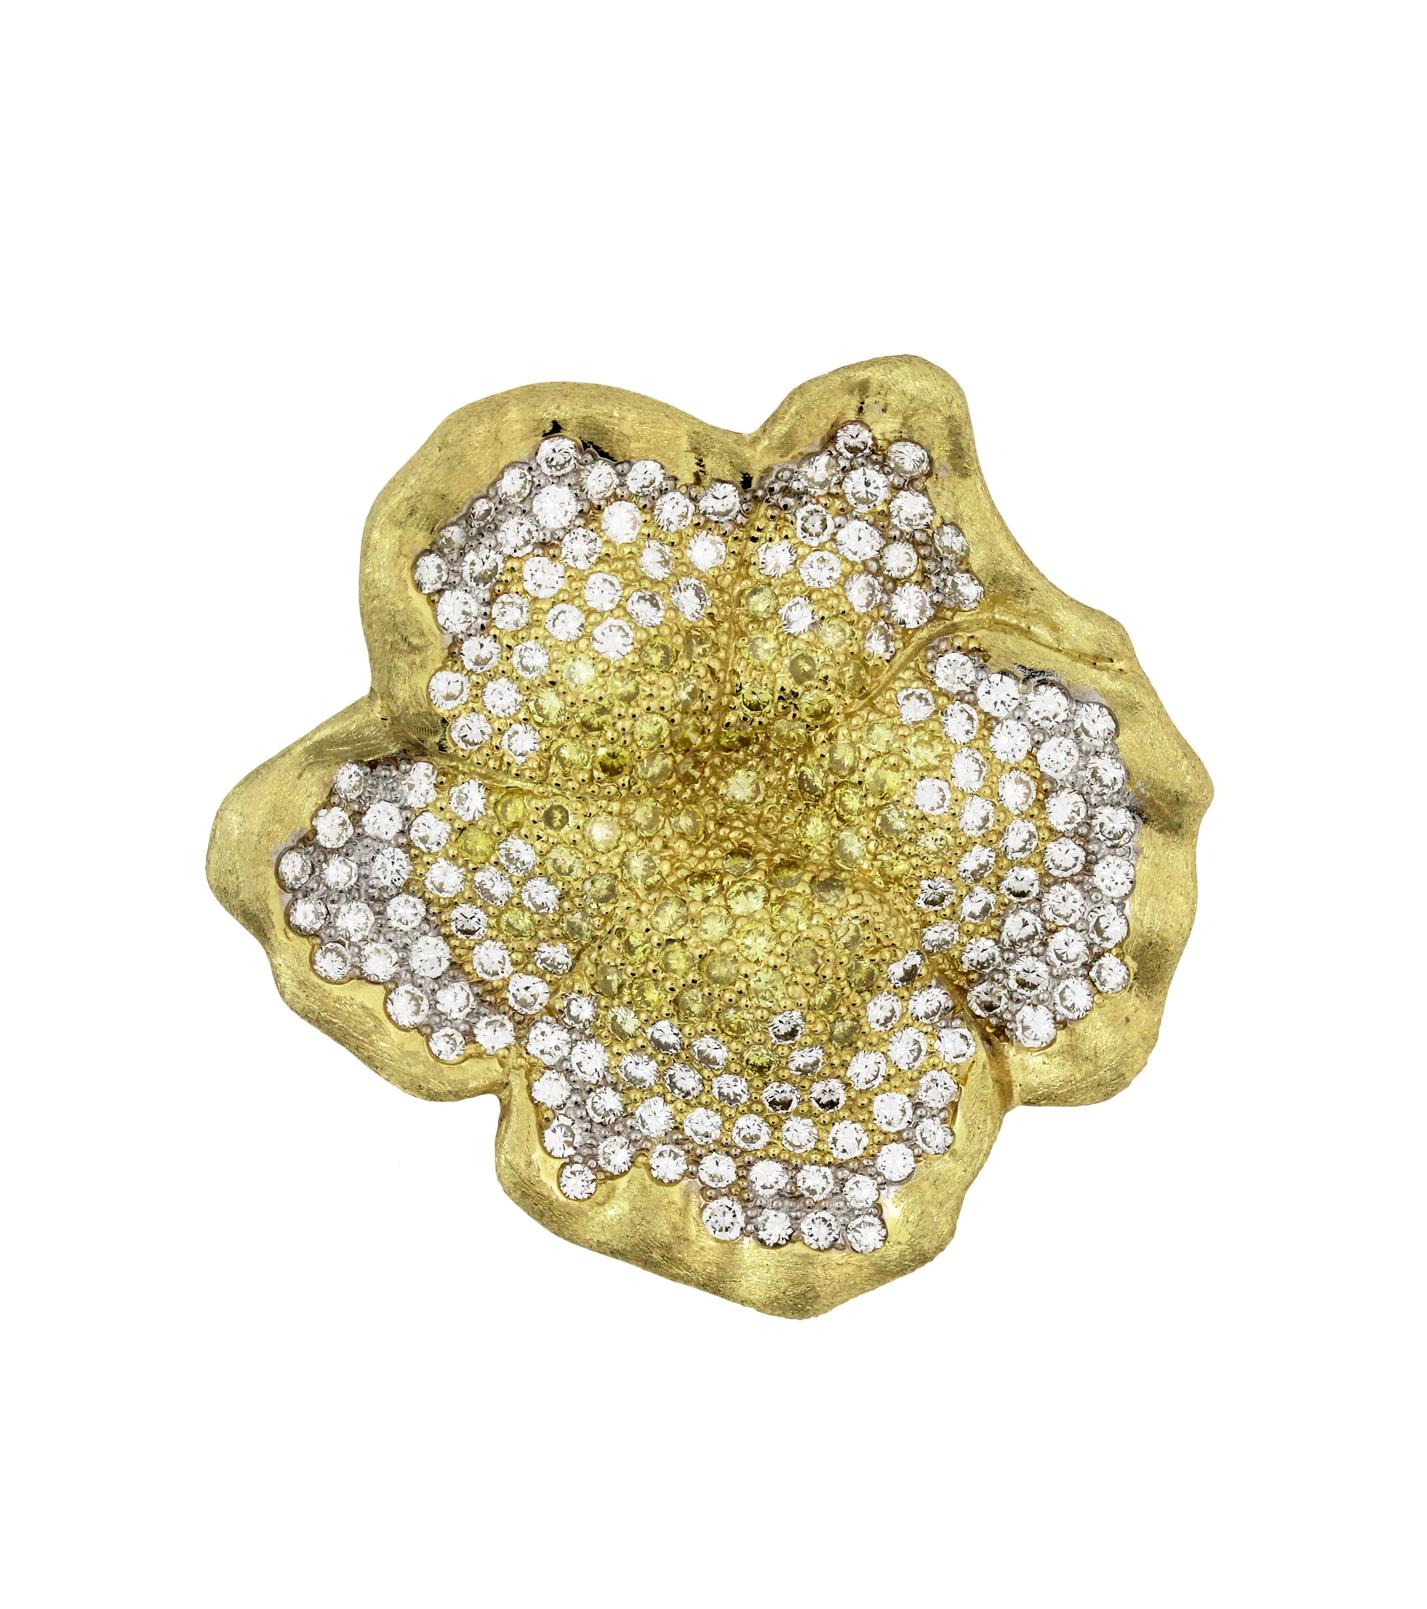 IF YOU ARE REALLY INTERESTED, CONTACT US WITH ANY REASONABLE OFFER. WE WILL TRY OUR BEST TO MAKE YOU HAPPY!

18K Yellow Gold Floral Pendant Necklace with Yellow and White Diamond 

Pendant is made up of:
3.24 carat G color, VS clarity white